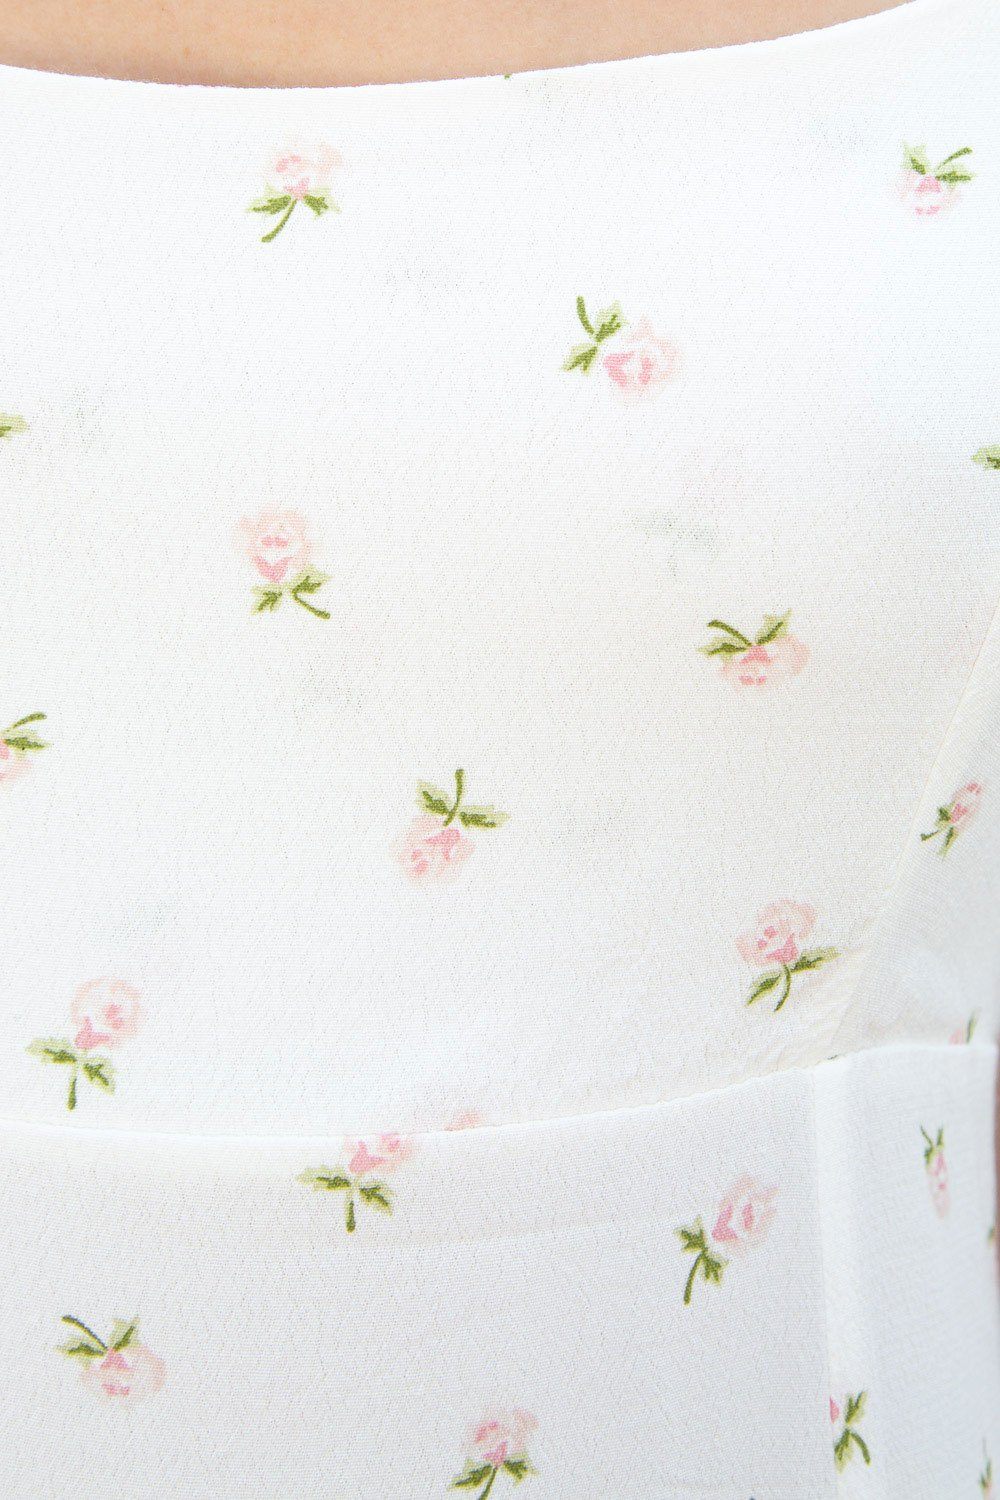 White With Pink And Green Floral